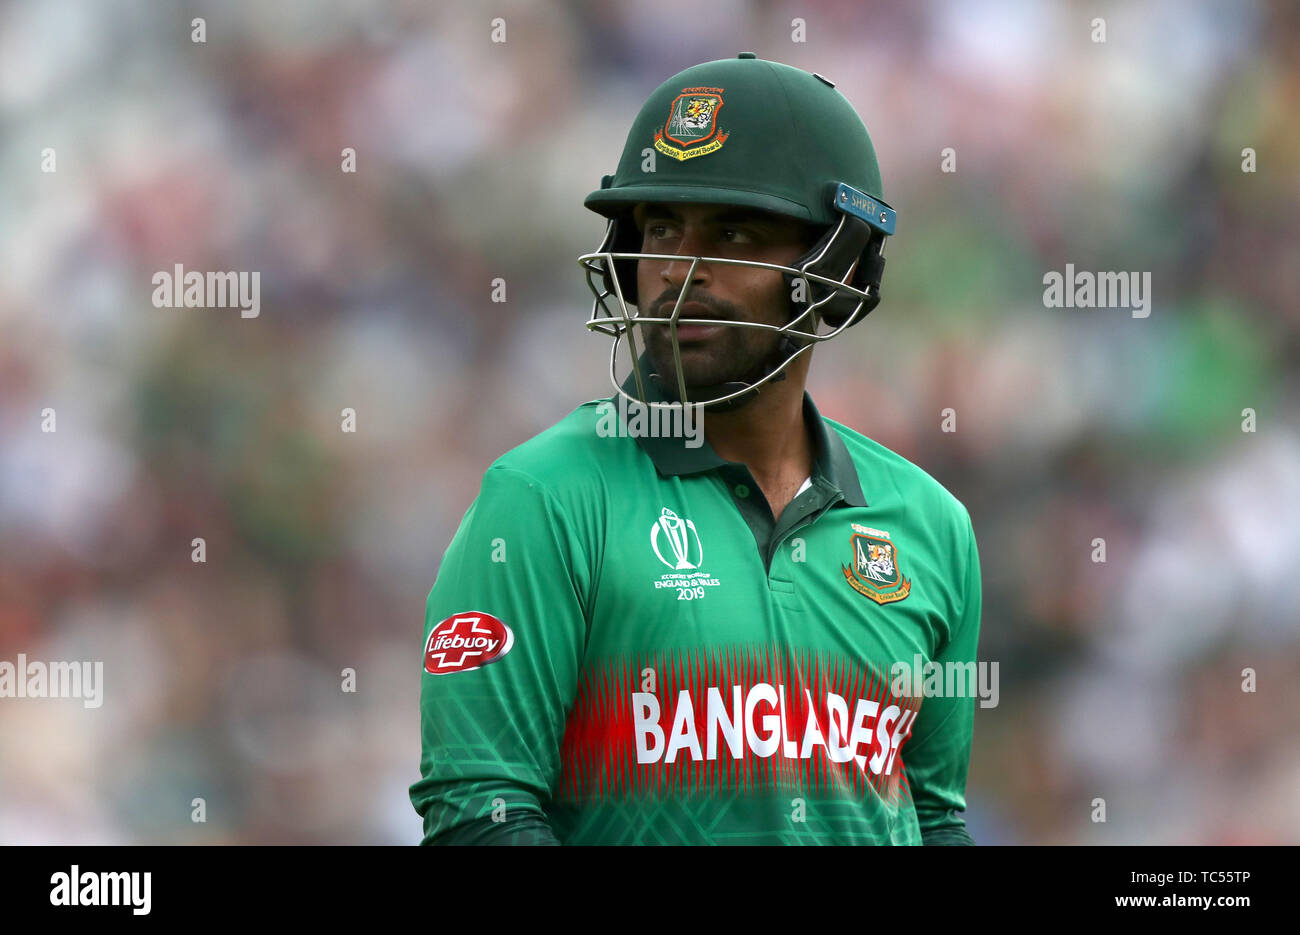 Bangladesh's Tamim Iqbal walks off after being dismissed during the ICC Cricket World Cup group stage match at The Oval, London. Stock Photo